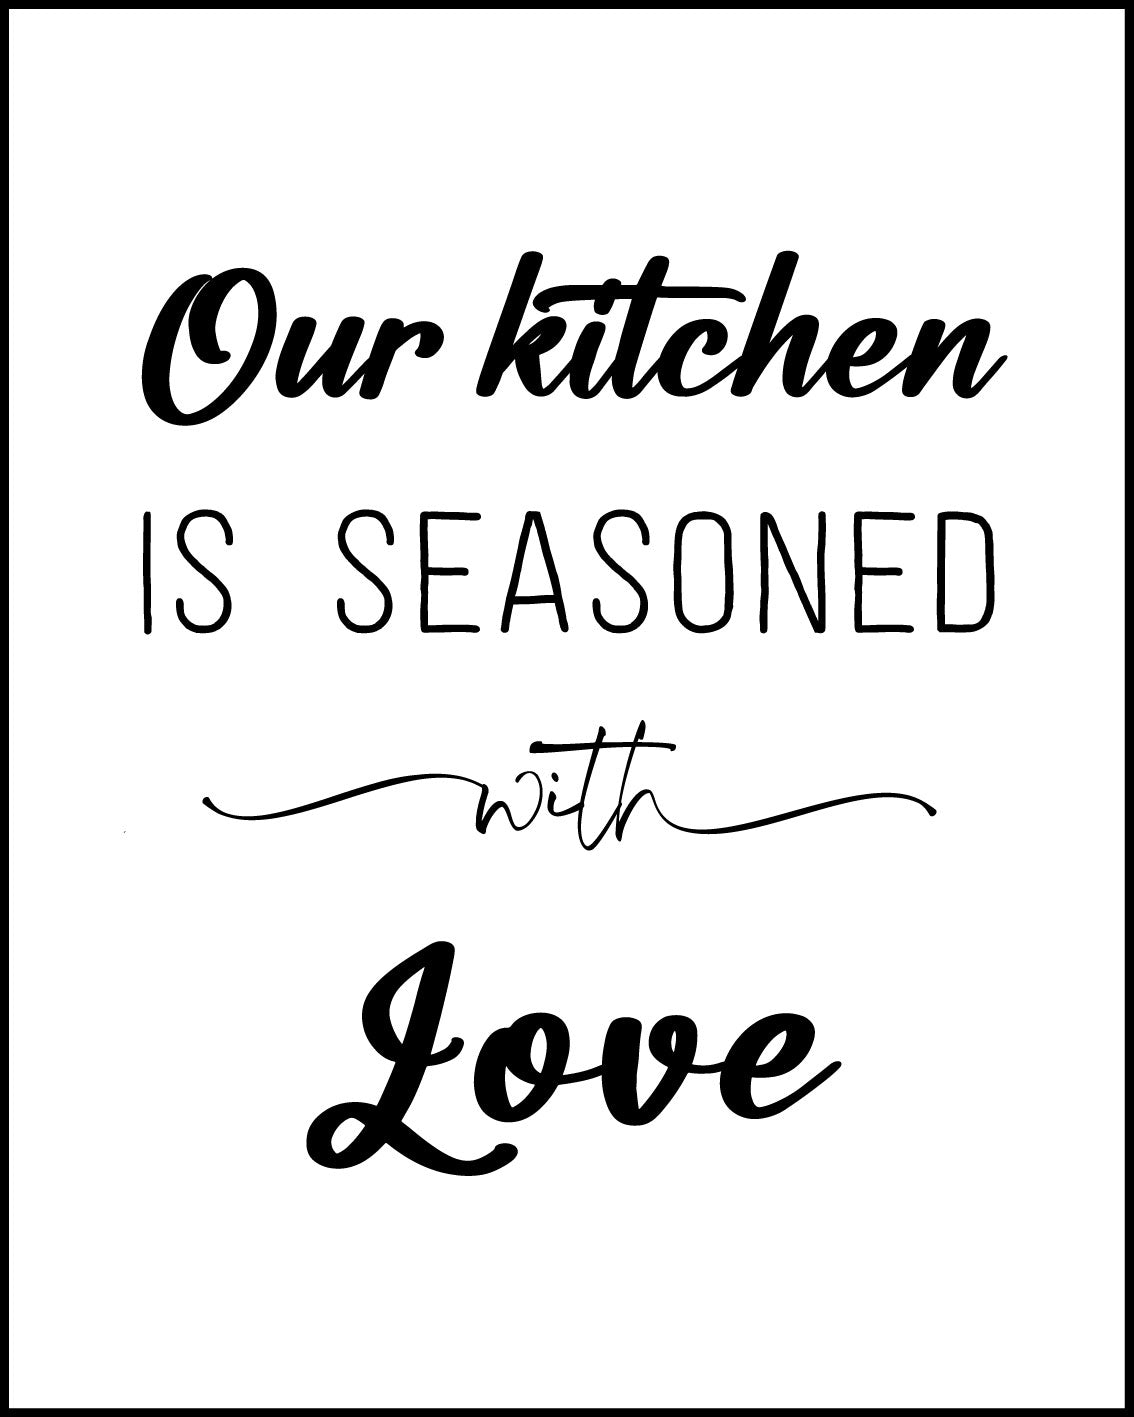 Our kitchen is seasoned with love Poster